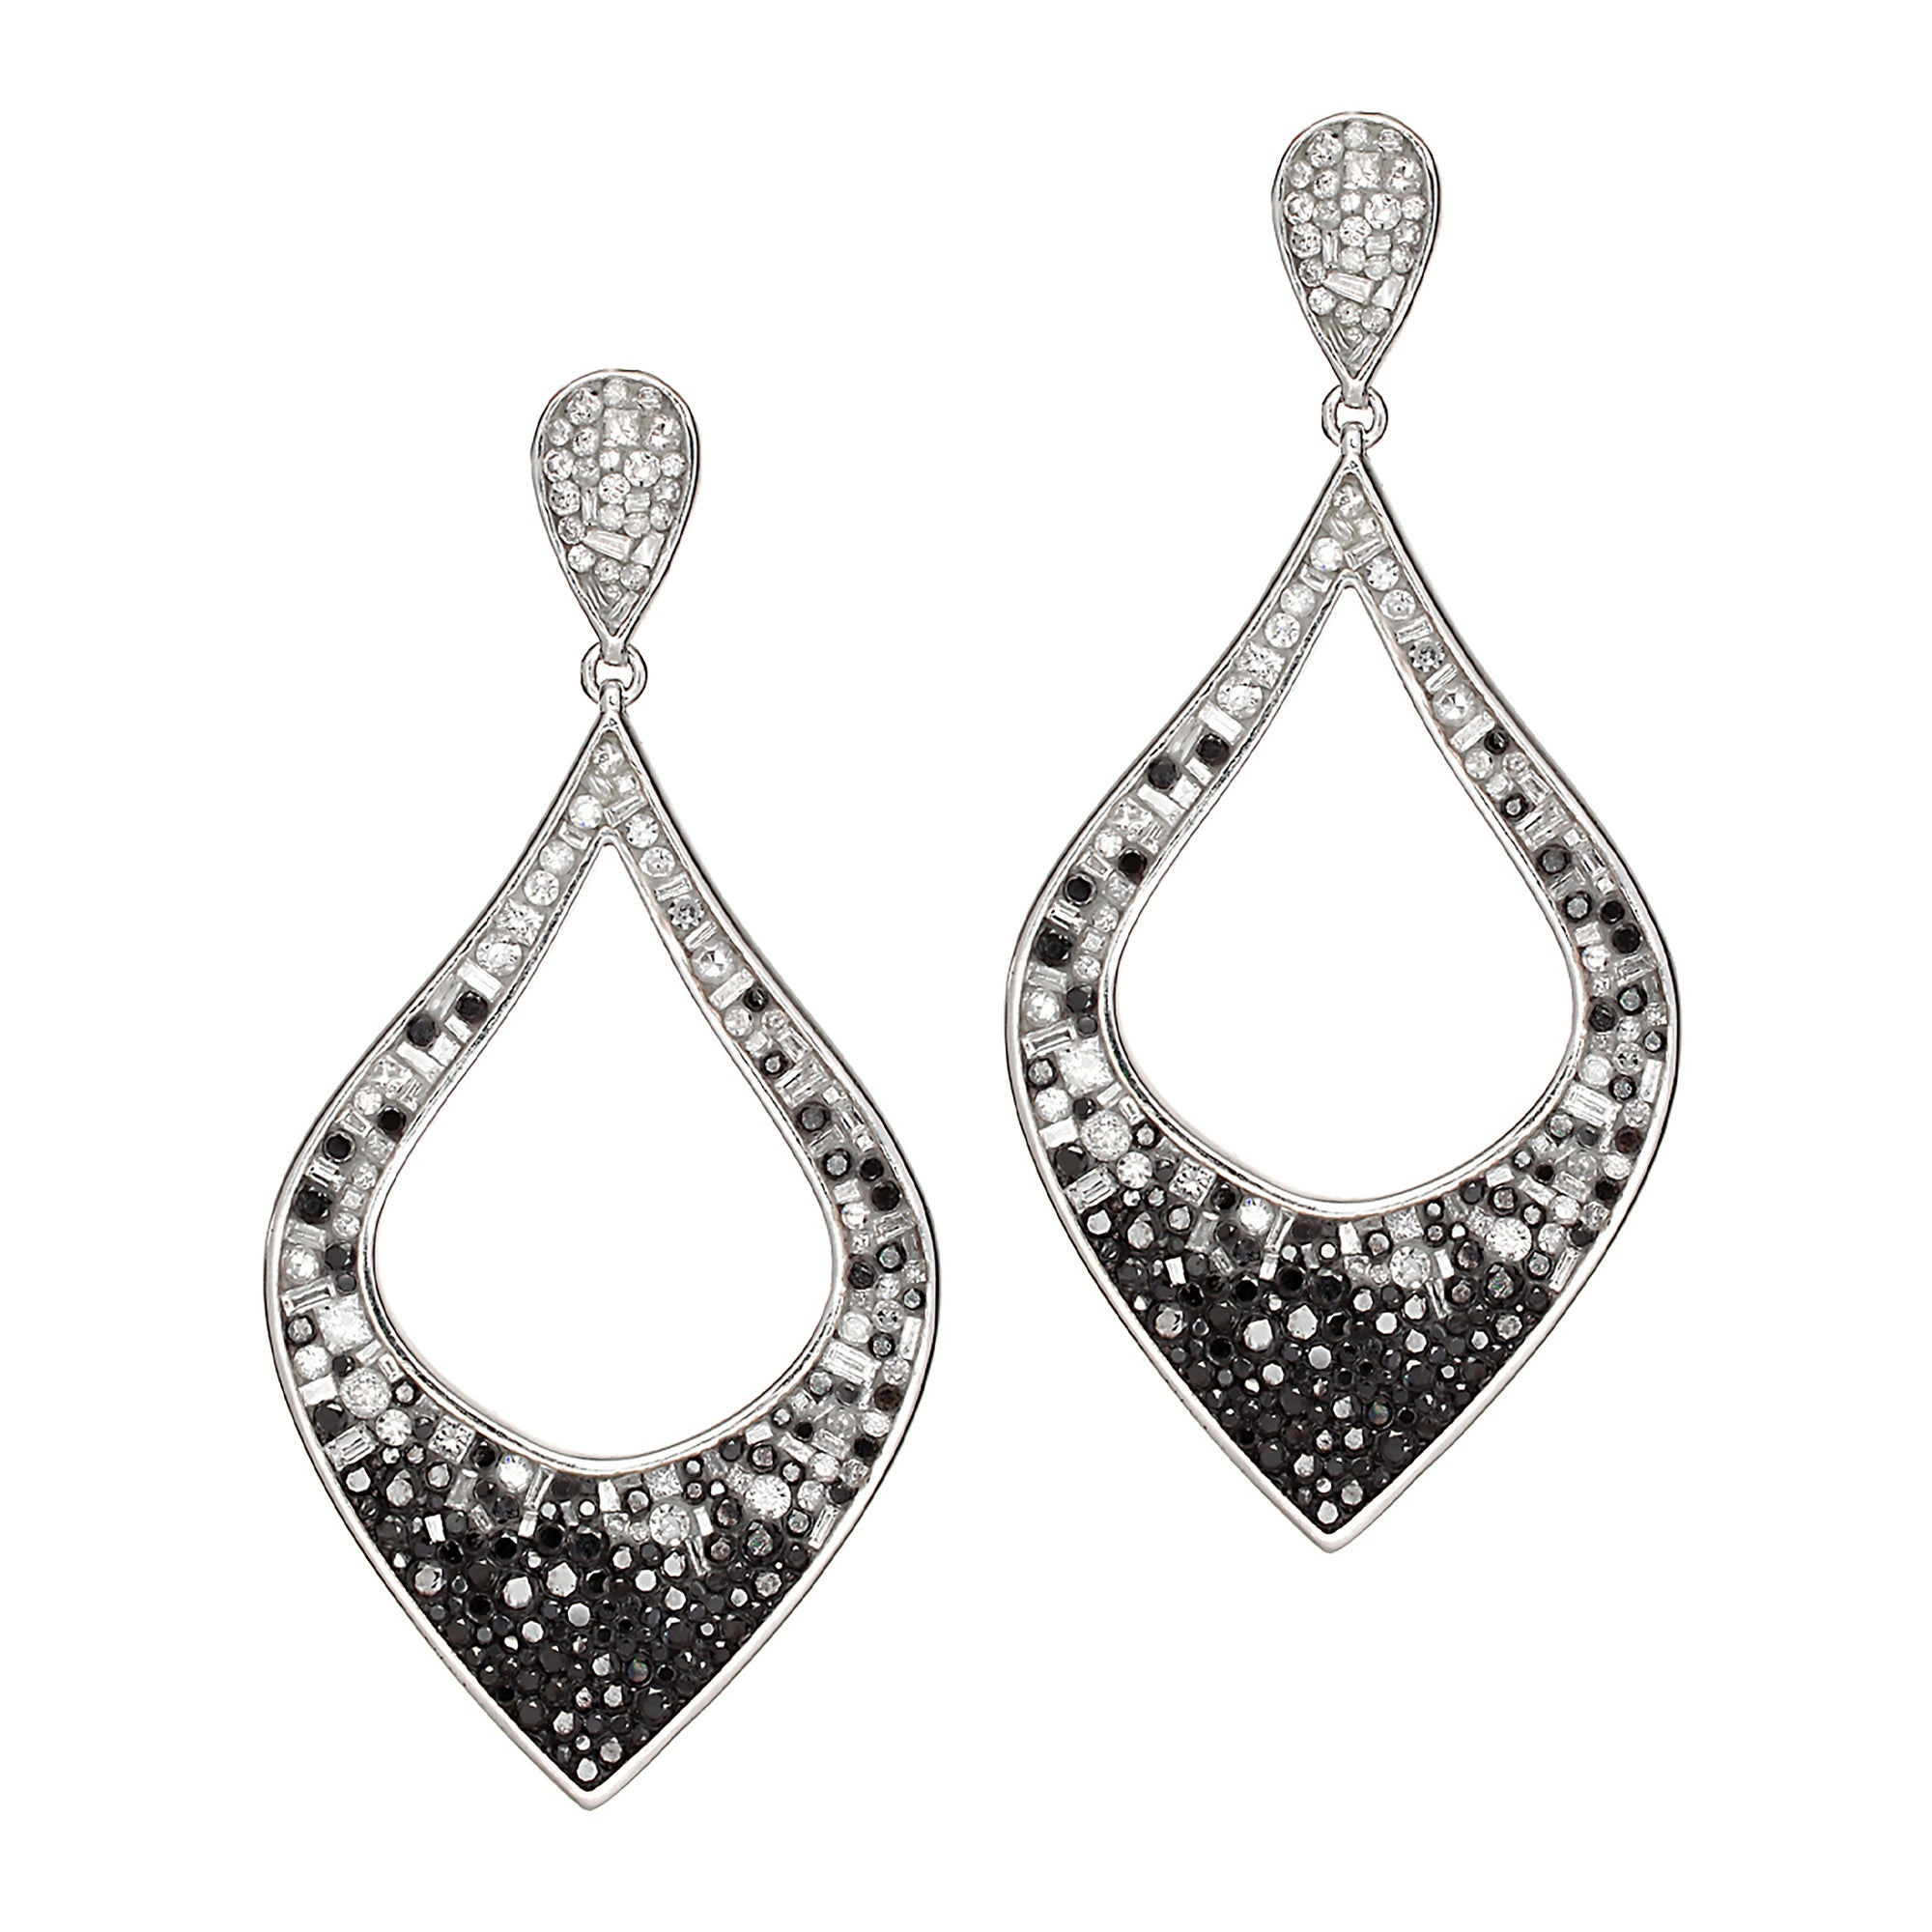 Black Ombre Petal Diamond Earrings by Pleve available at Talisman Collection Fine Jewelers in El Dorado Hills, CA and online. Specs: 18k wg dia & color enhanced dia 7.10 cttw 